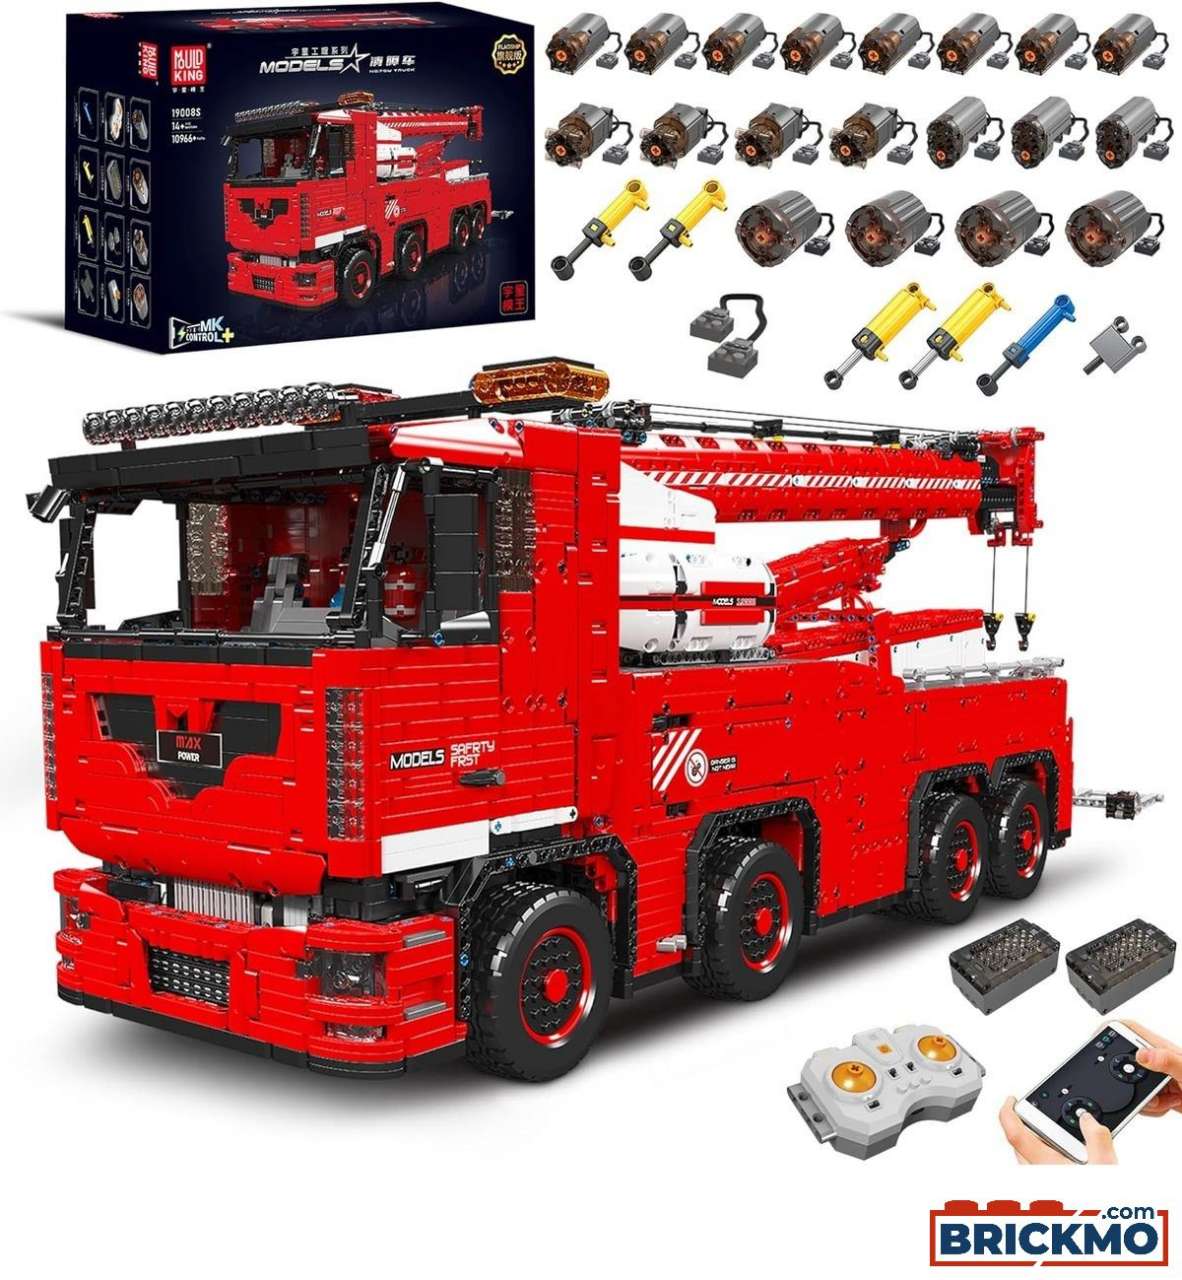 Mould King Remote Control Fire Truck 19008S